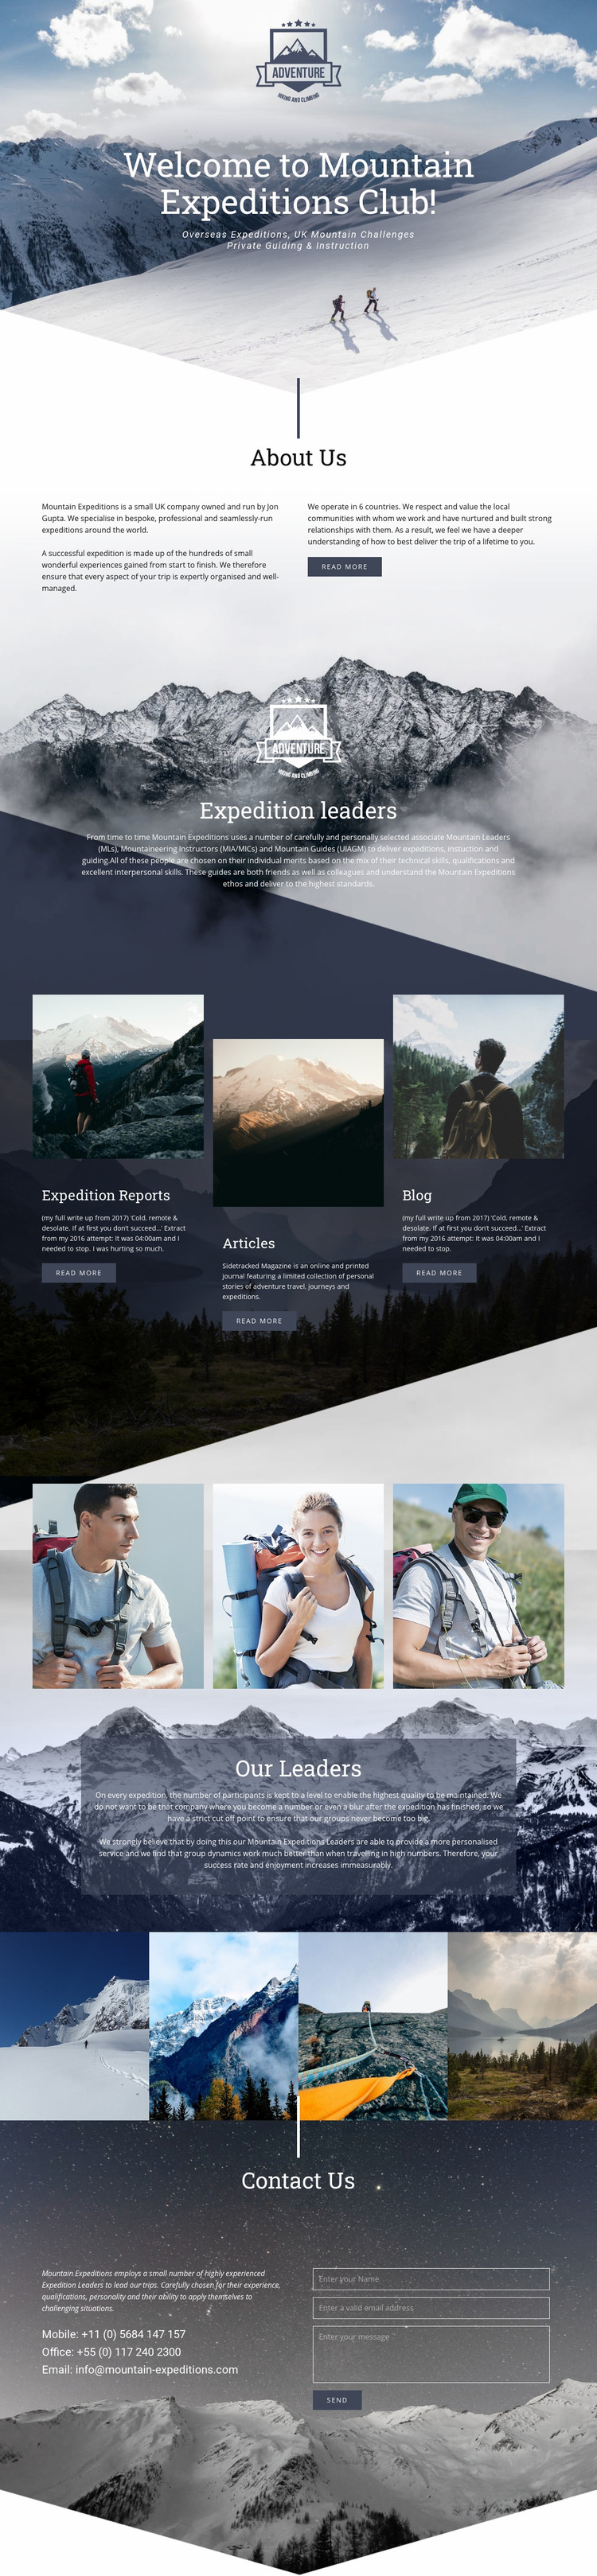 Extreme mountain expedition Web Page Design